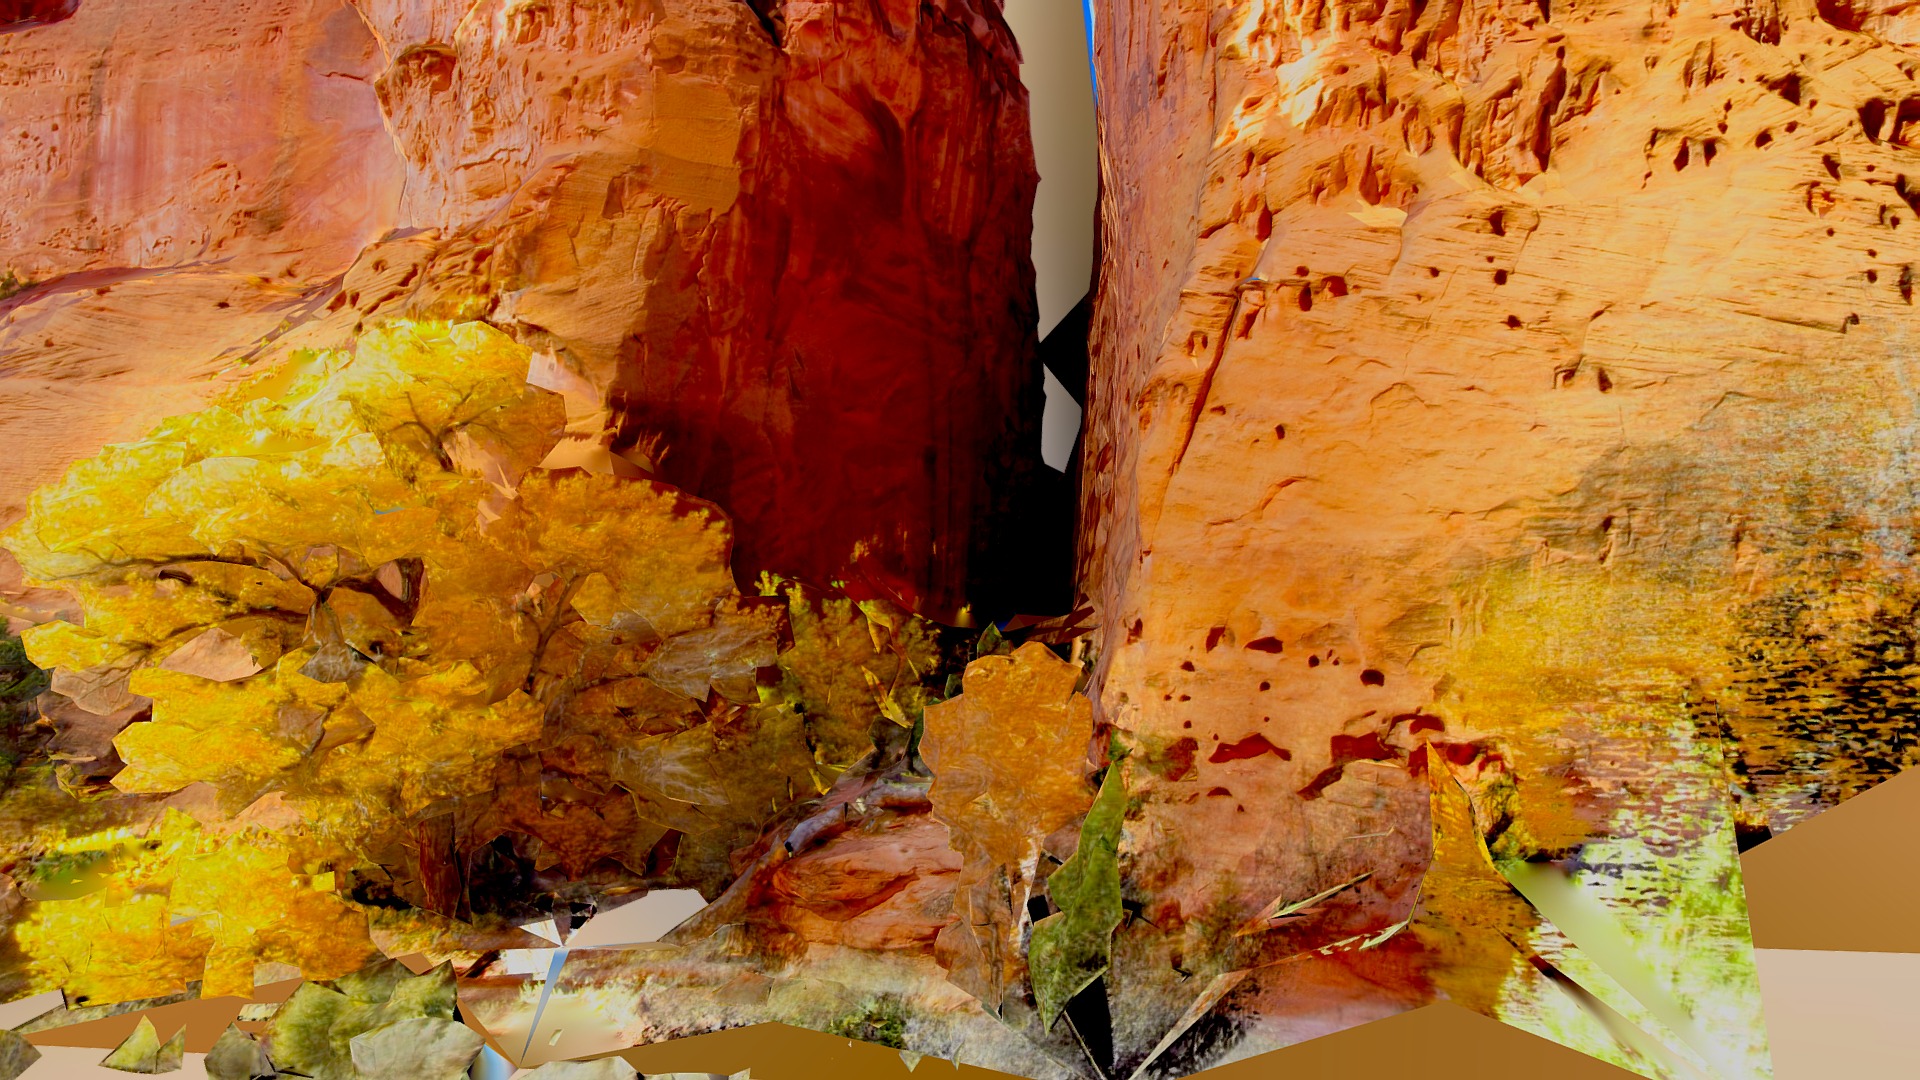 3D model Utahslotcanyon test2 - This is a 3D model of the Utahslotcanyon test2. The 3D model is about a red and yellow rock formation.